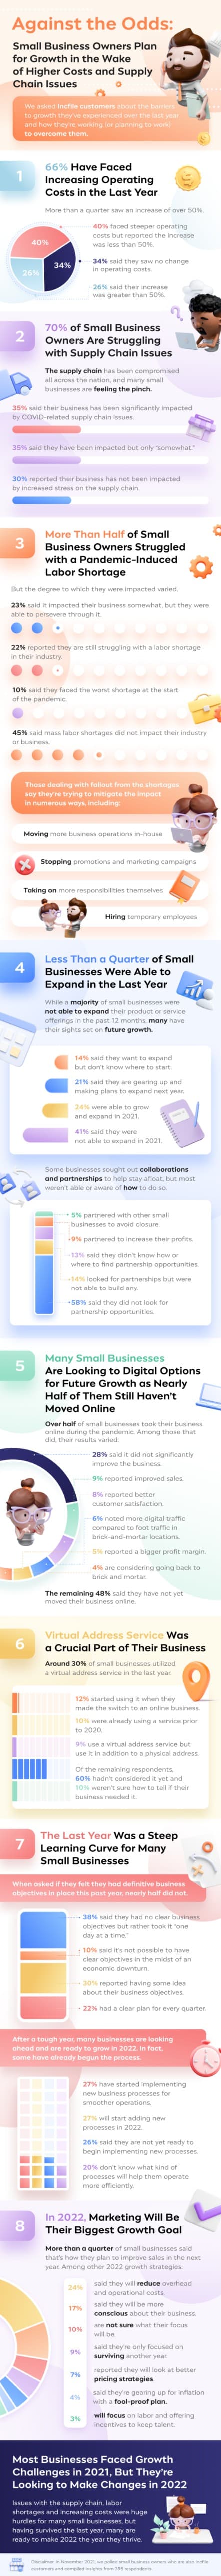 small-business-owners-growth-survey -Infographic